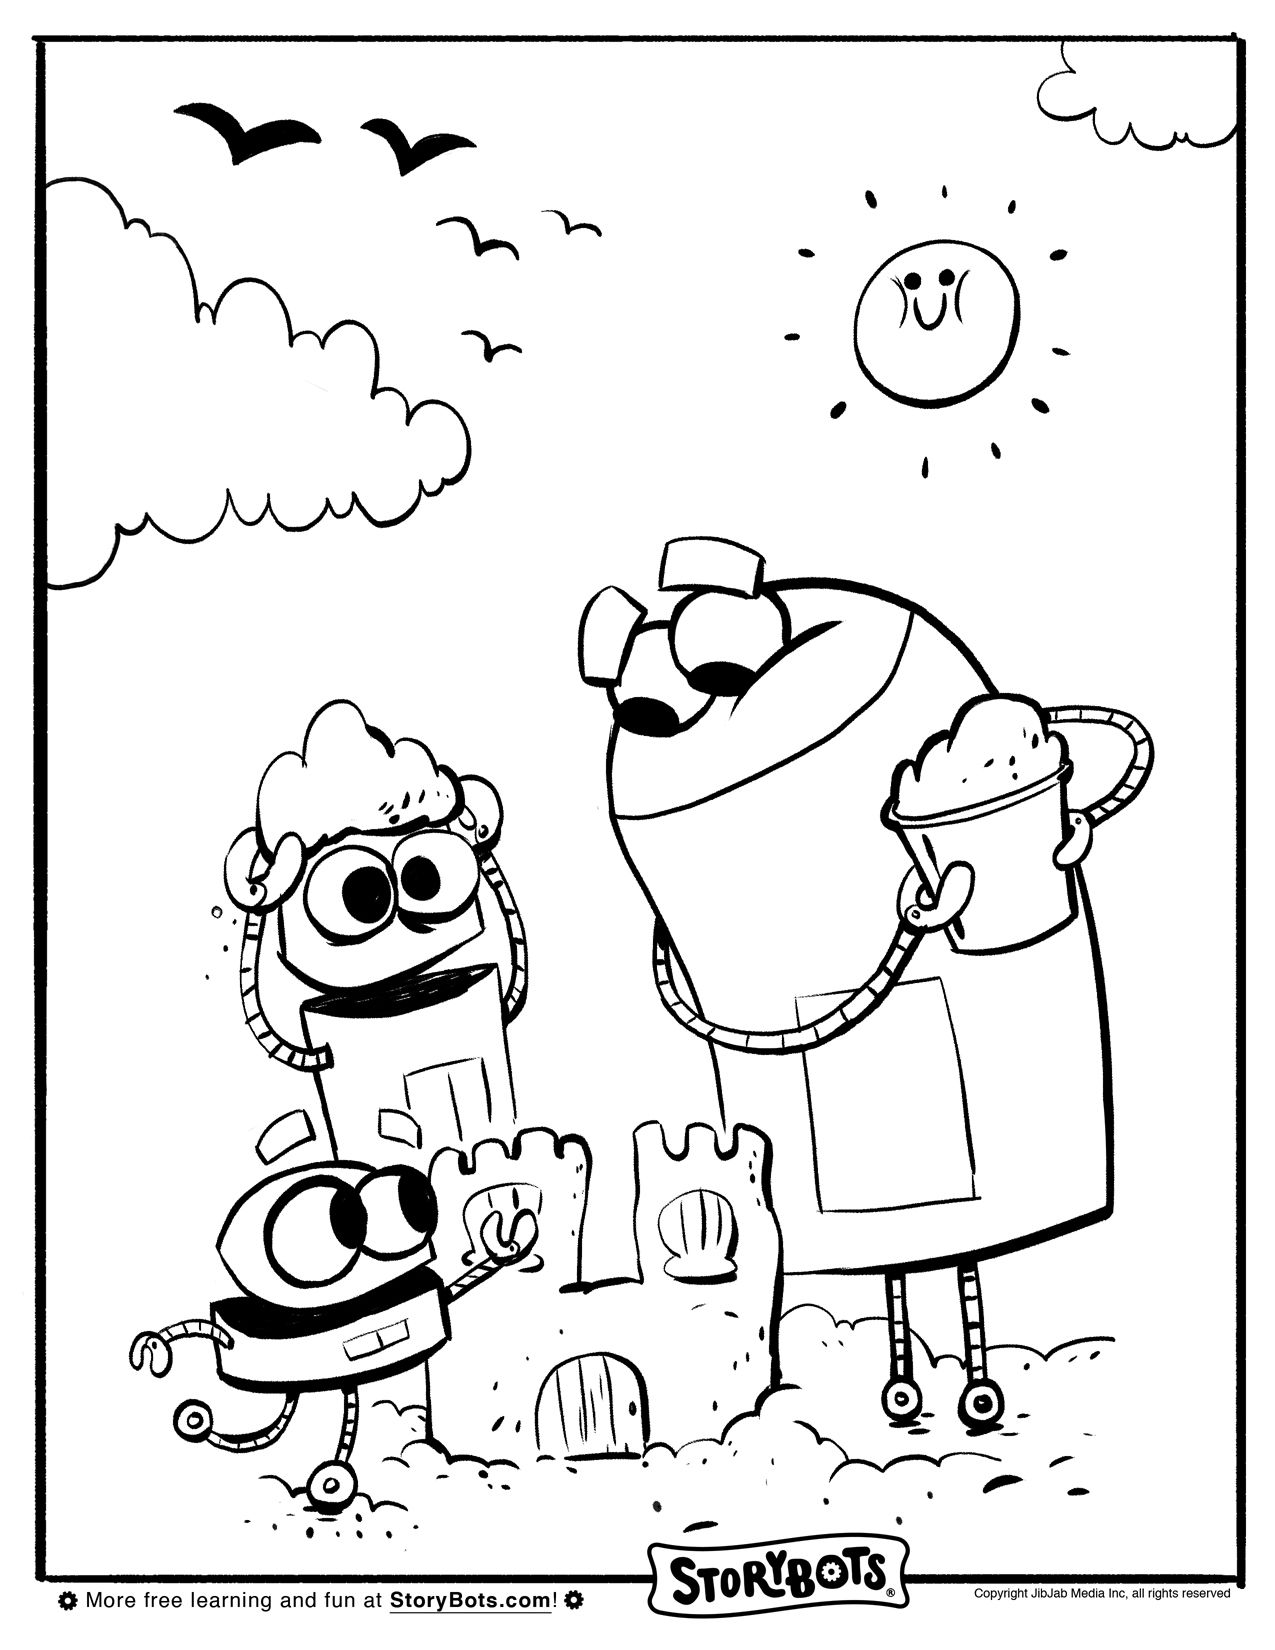 Ask The Storybots Coloring Pages - Visual Arts Ideas